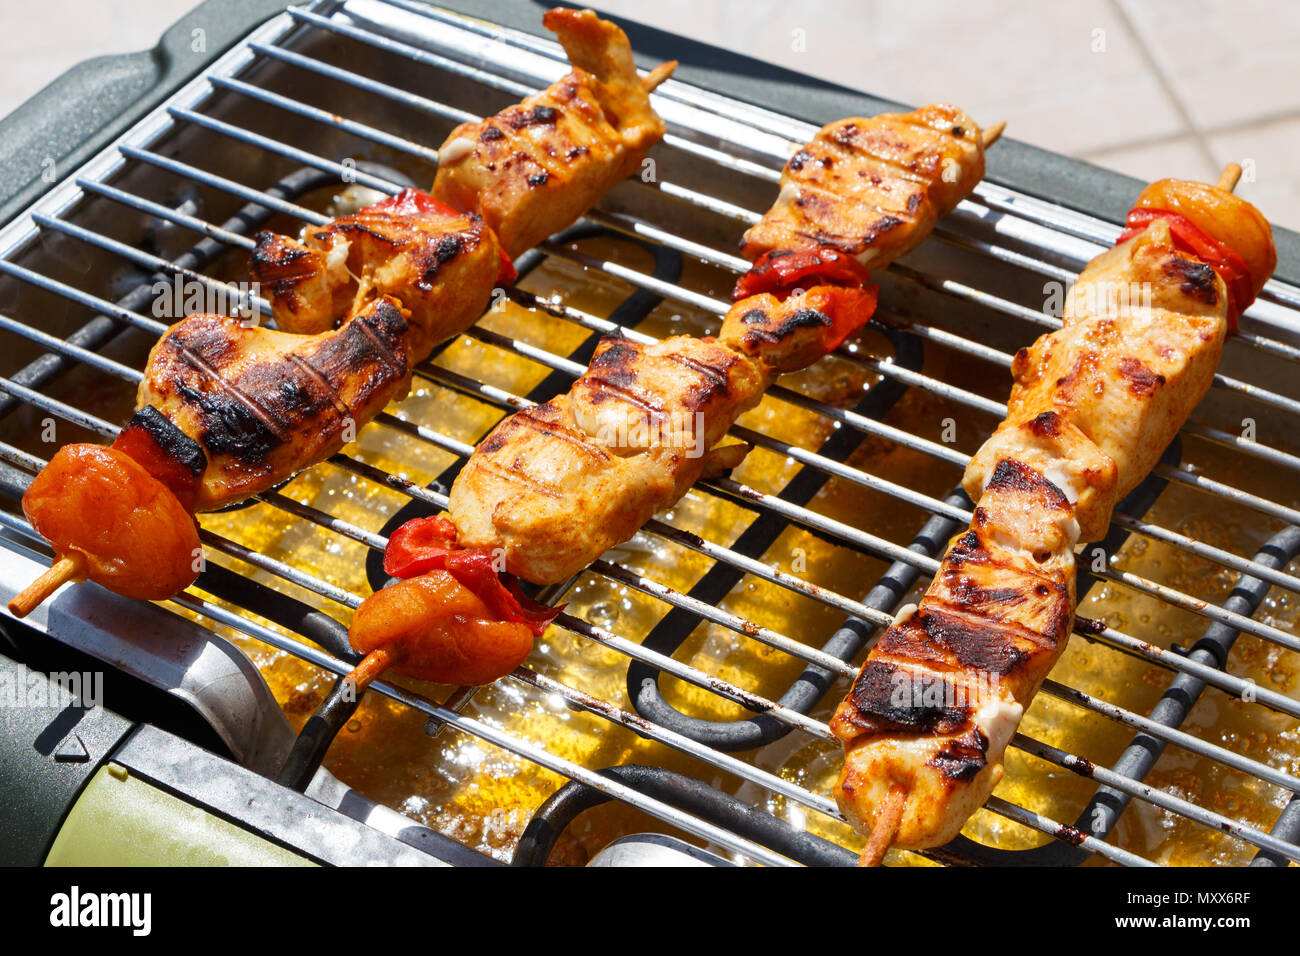 Marinated chicken brochette with pepper and dry apricot on the grid of an electric barbecue Stock Photo